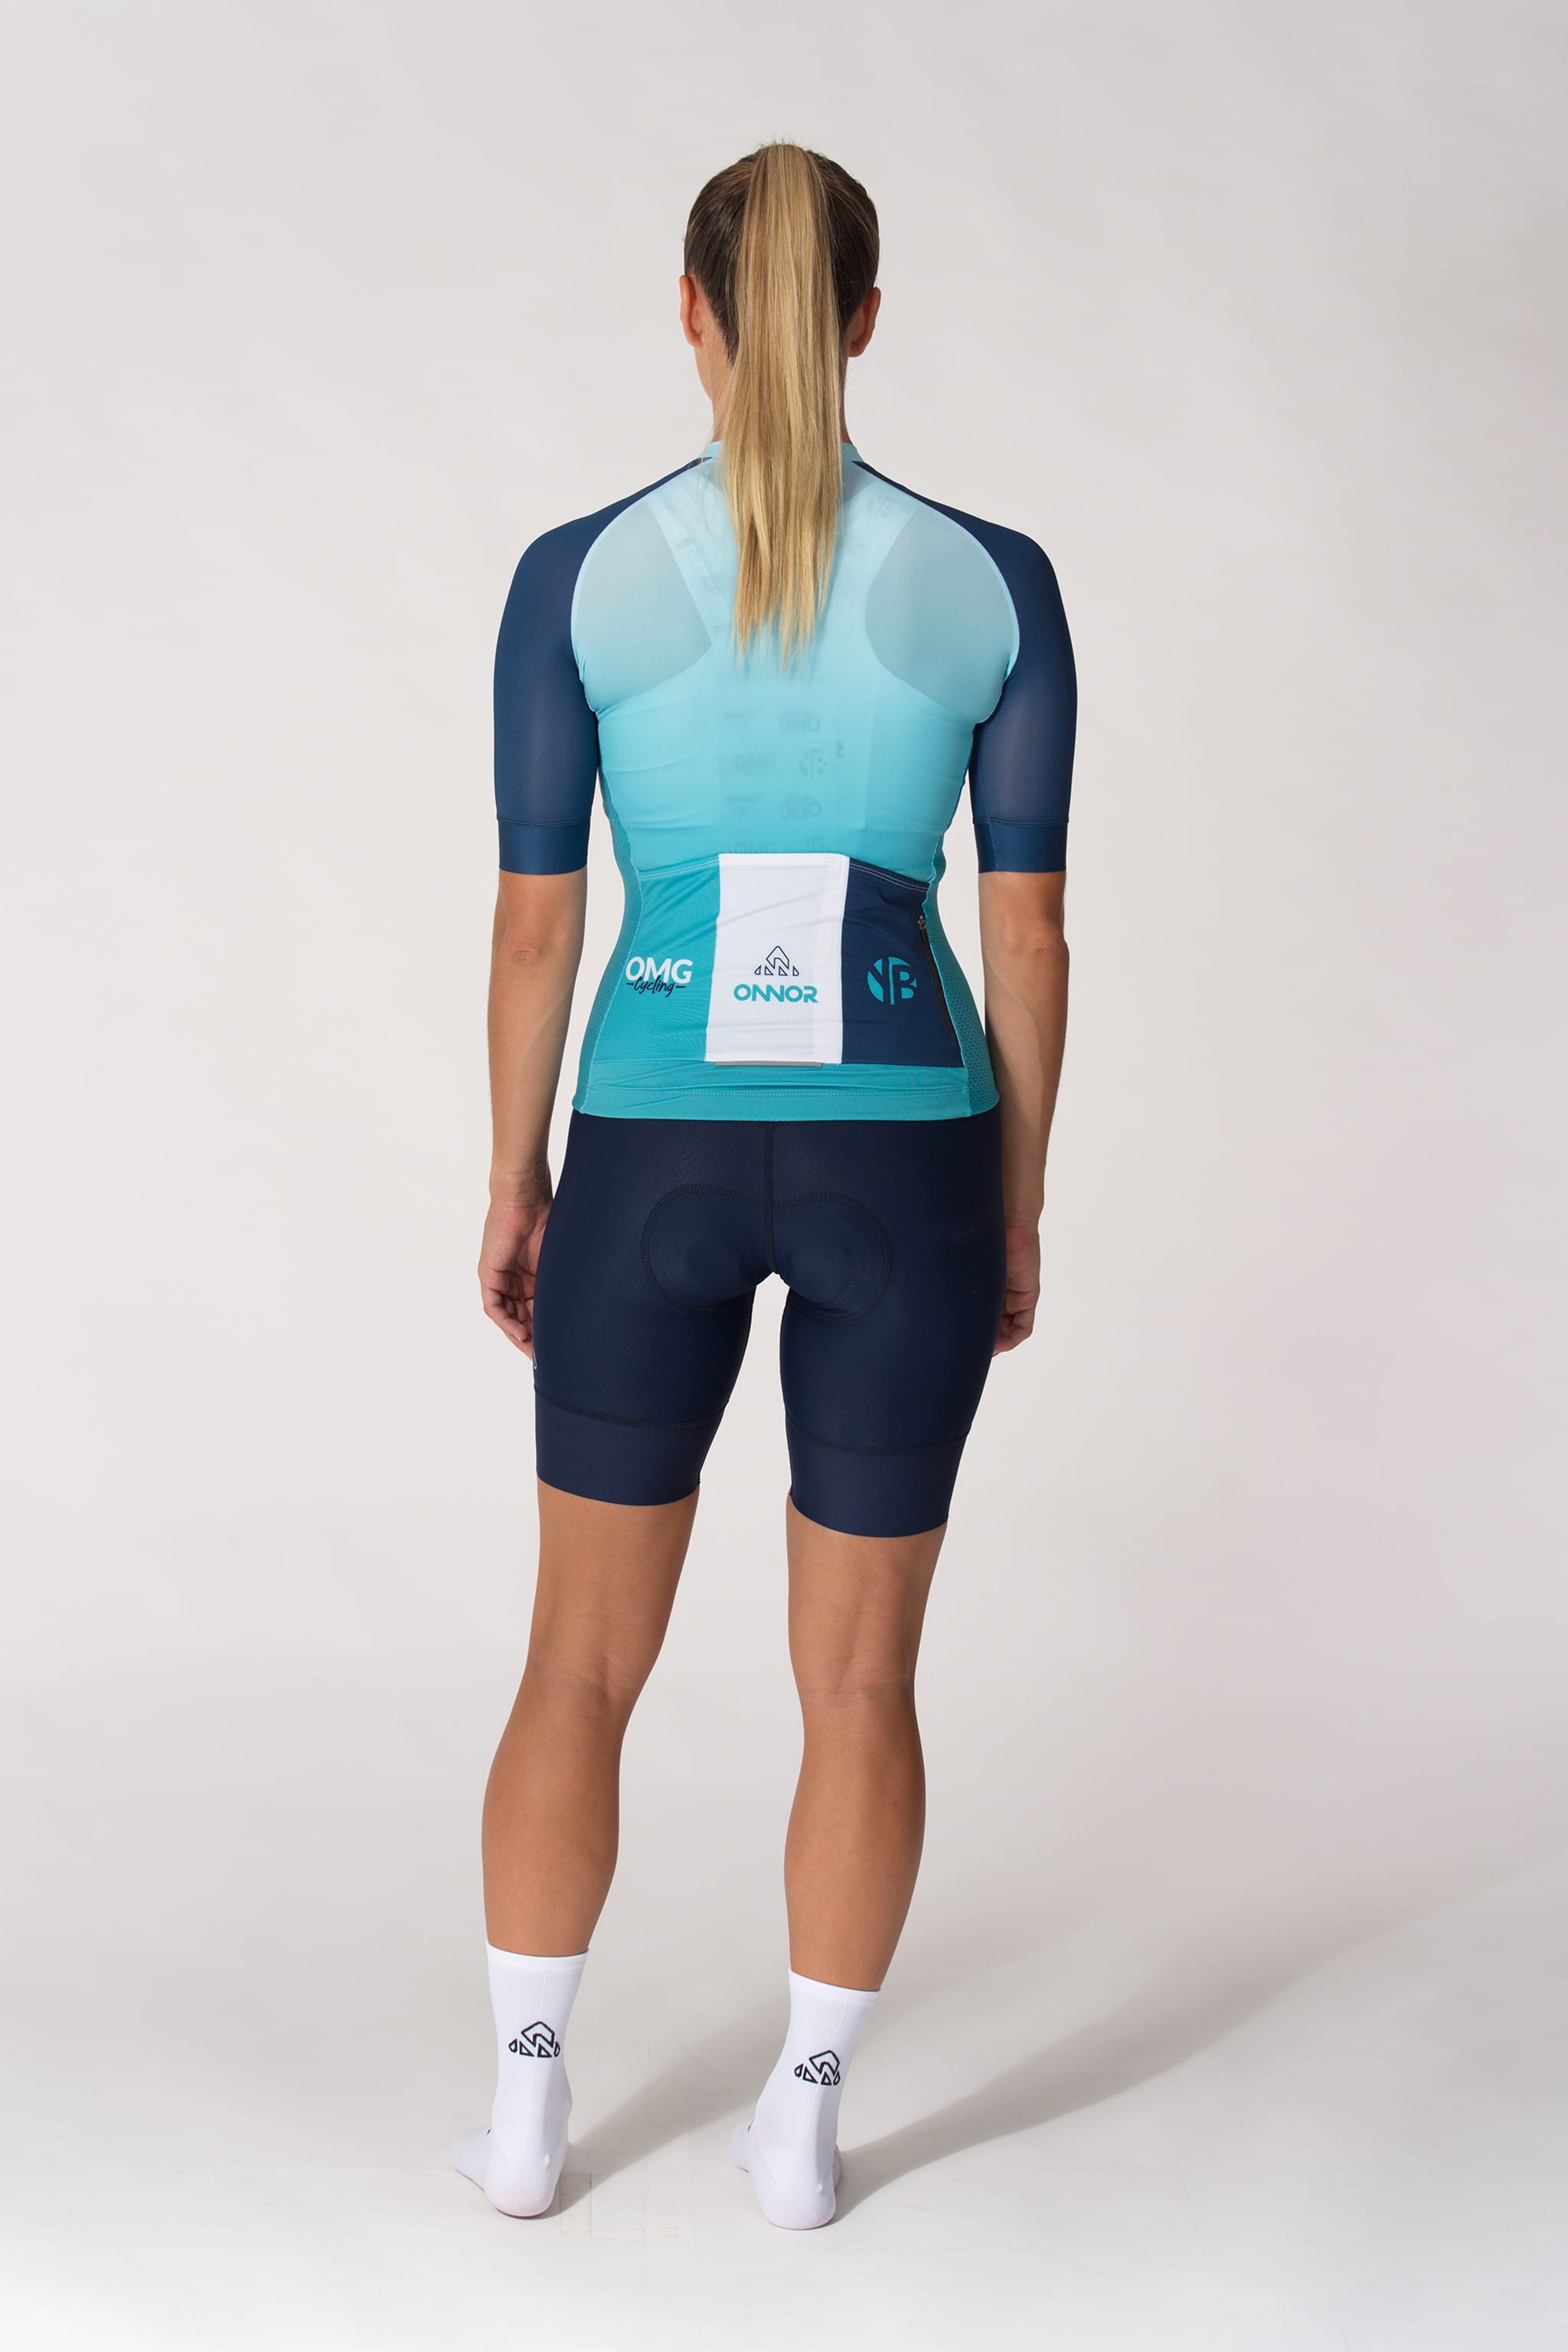 Create Your Own Cycling Jersey - No Minimum Required